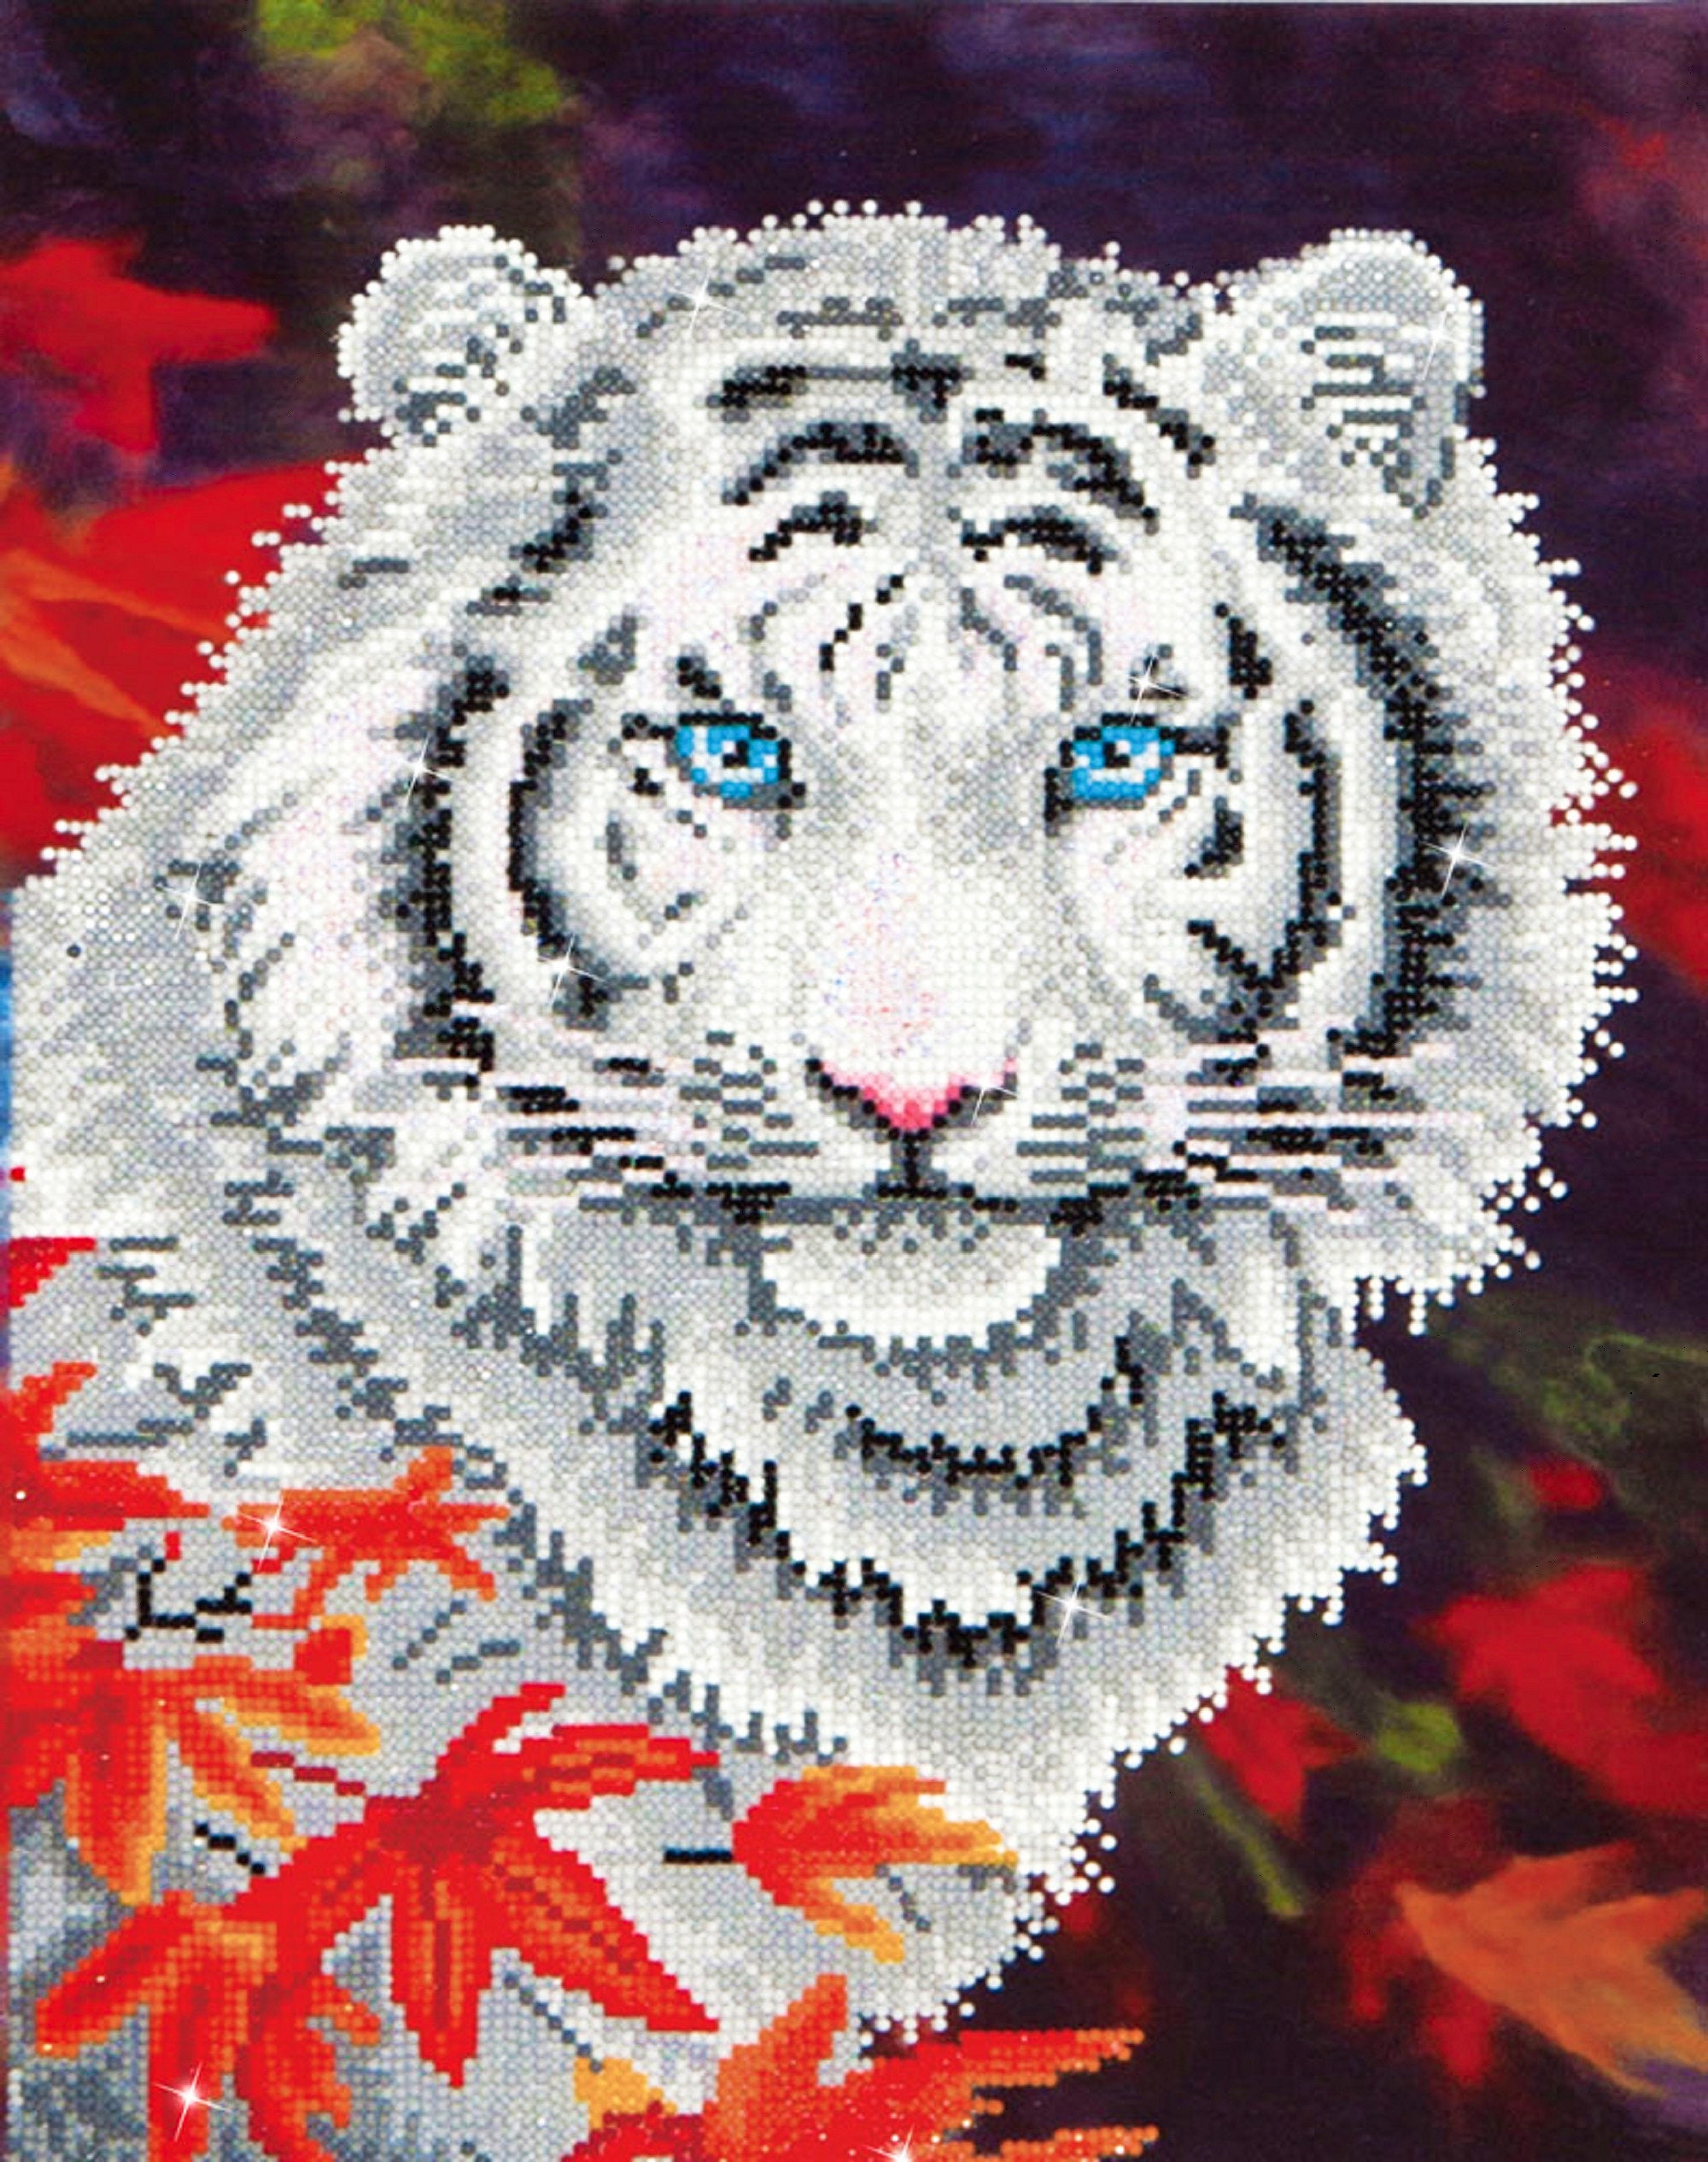 Lystmrge Diamond Painting Stickers for Kids Diamond Painting Kits Flowers Diamond Painting Light Kit Cat and Tiger DIY 5D Diamond Embroidery Painting